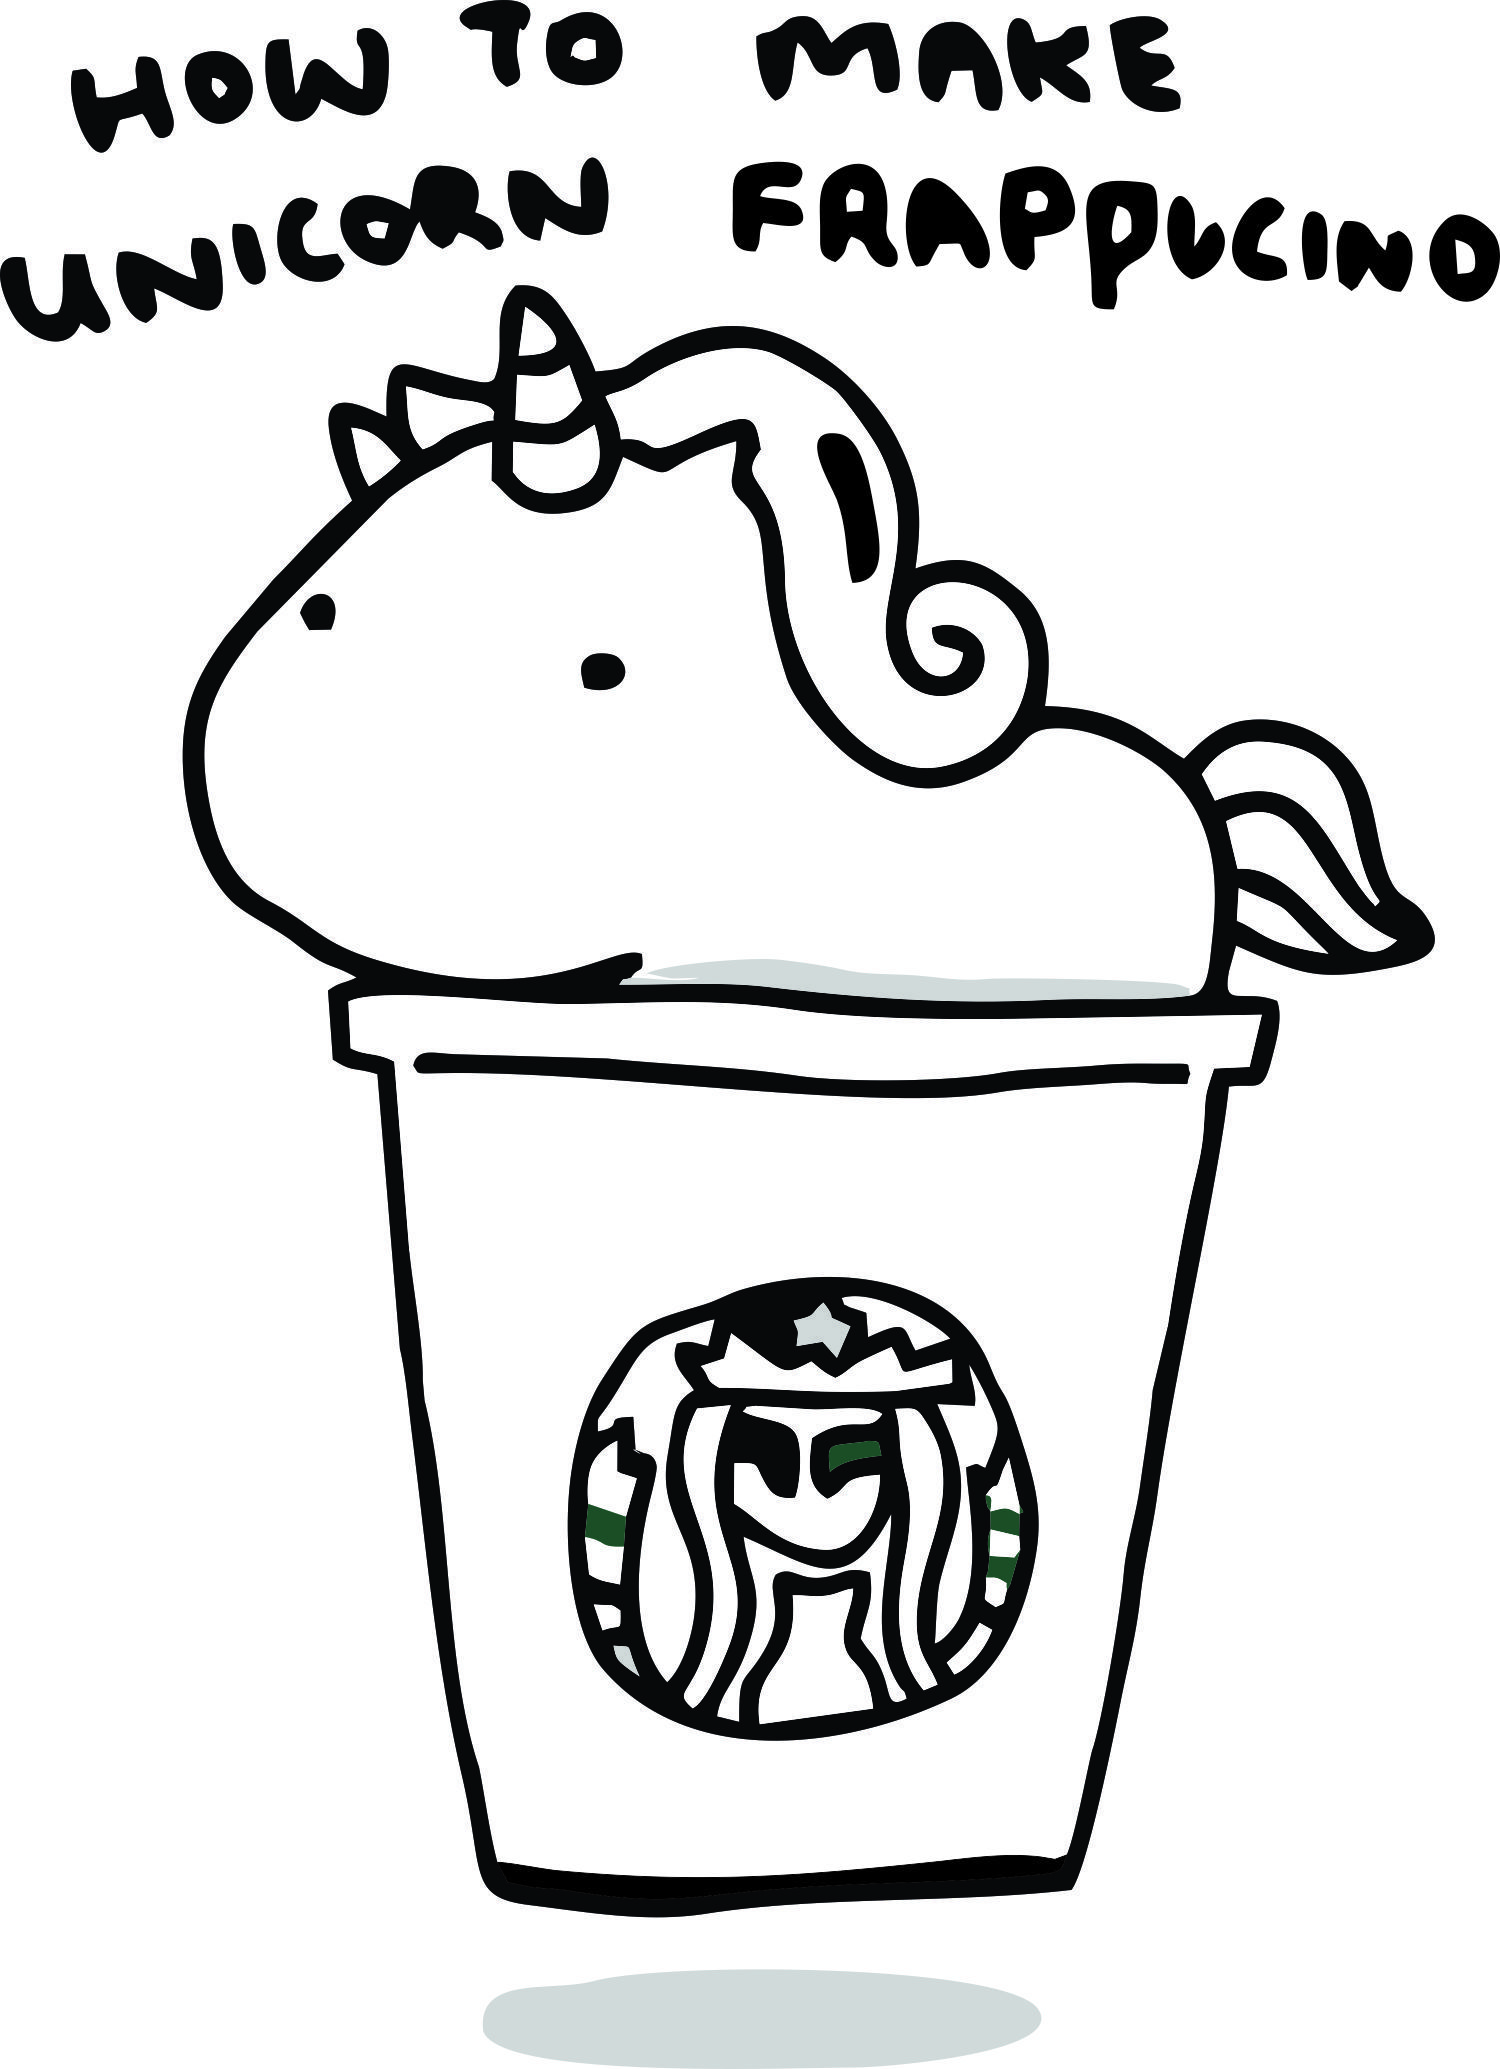 starbucks clipart colouring page